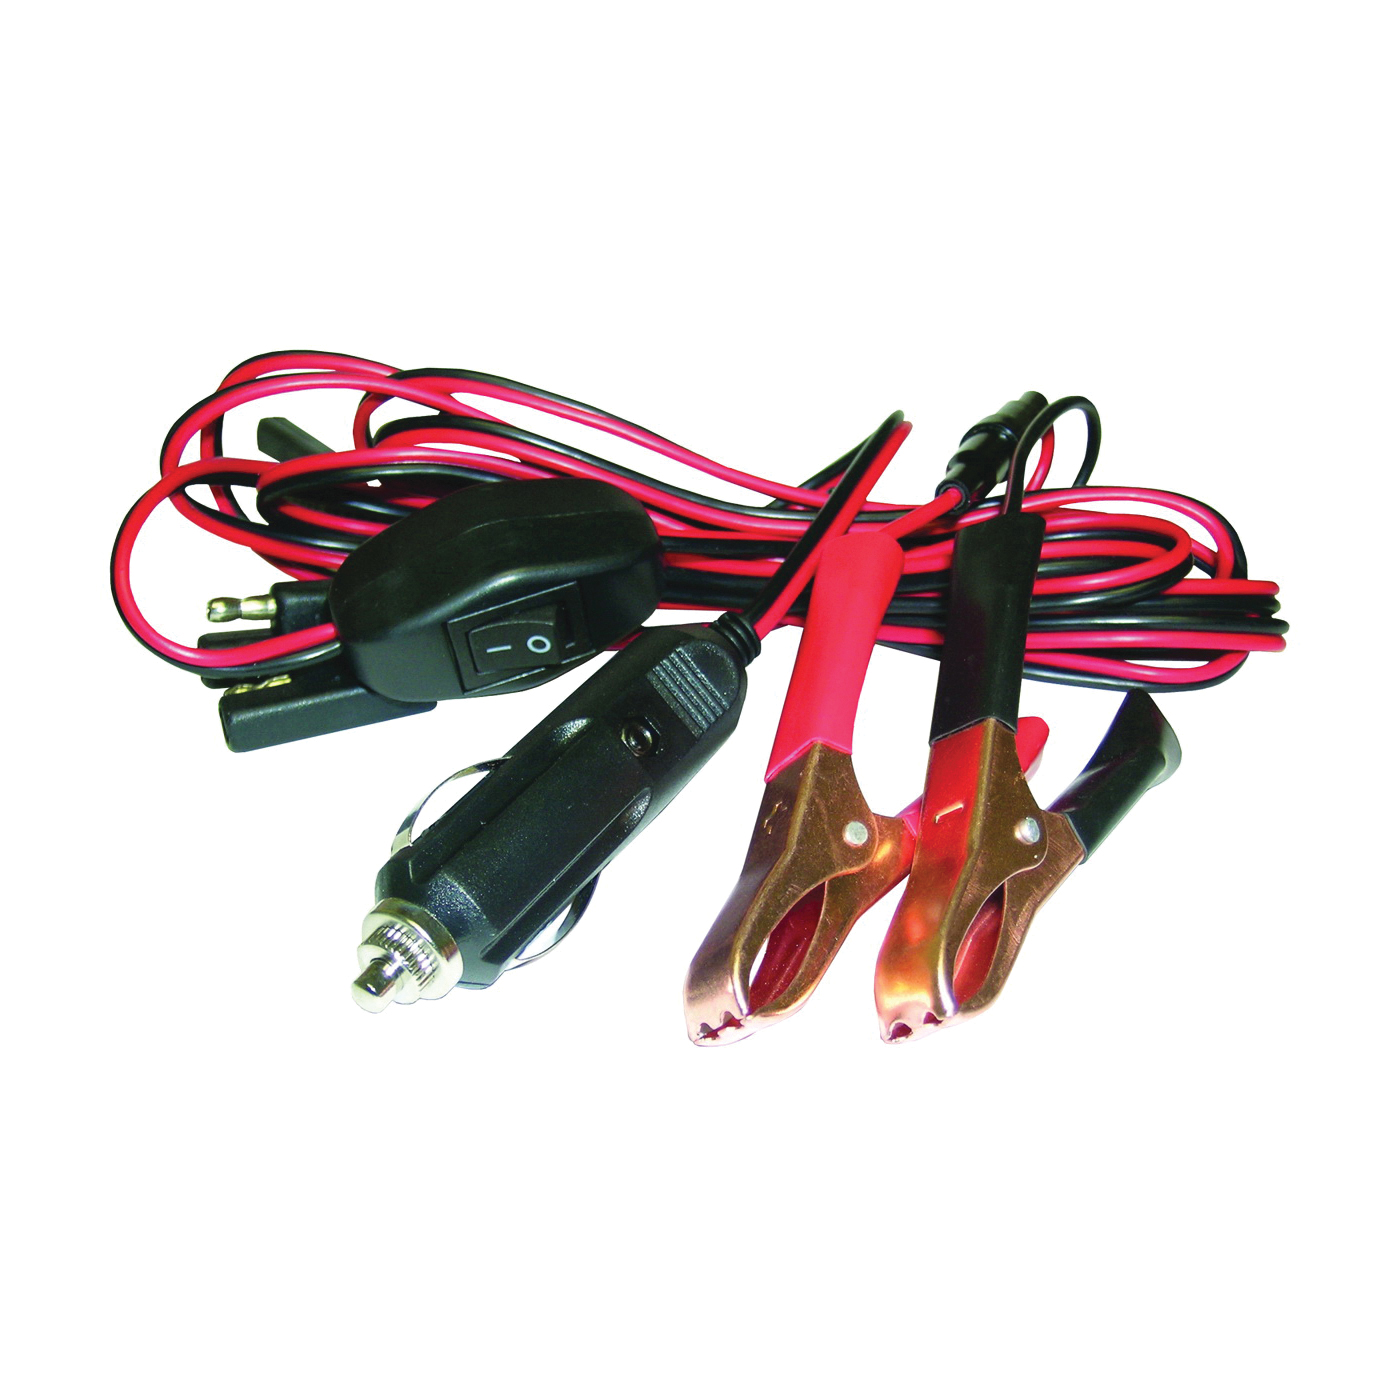 WH 104 1PK Wire Harness, For: 12 V Lawn and Garden Sprayers